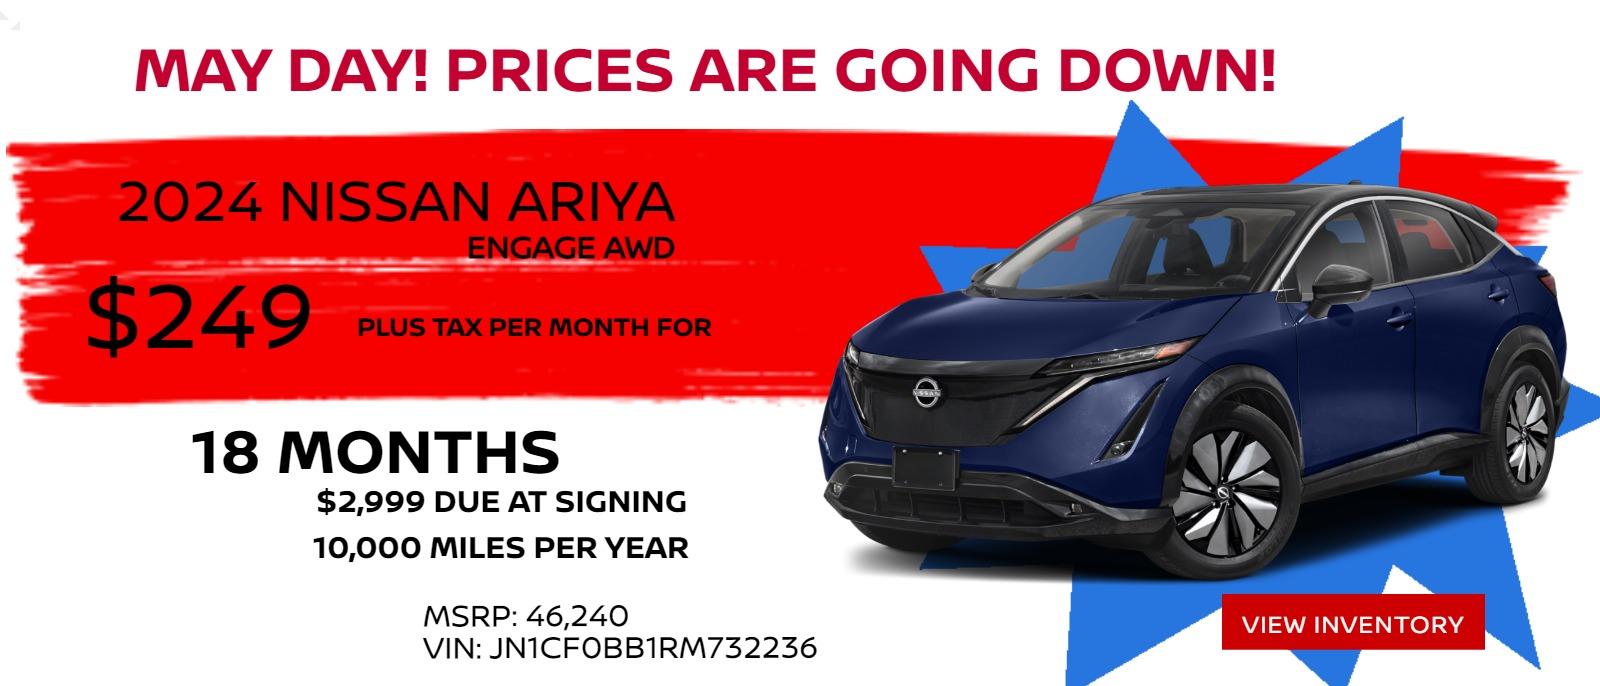 2024 NISSAN ARIYA ENGAGE PLUS AWD STOCK # 24152
MSRP: $46,240
$5,000 DOWN
$299 PER MONTH
18 MONTH LEASE/ 10K PER YEAR
Selling price: $44,000